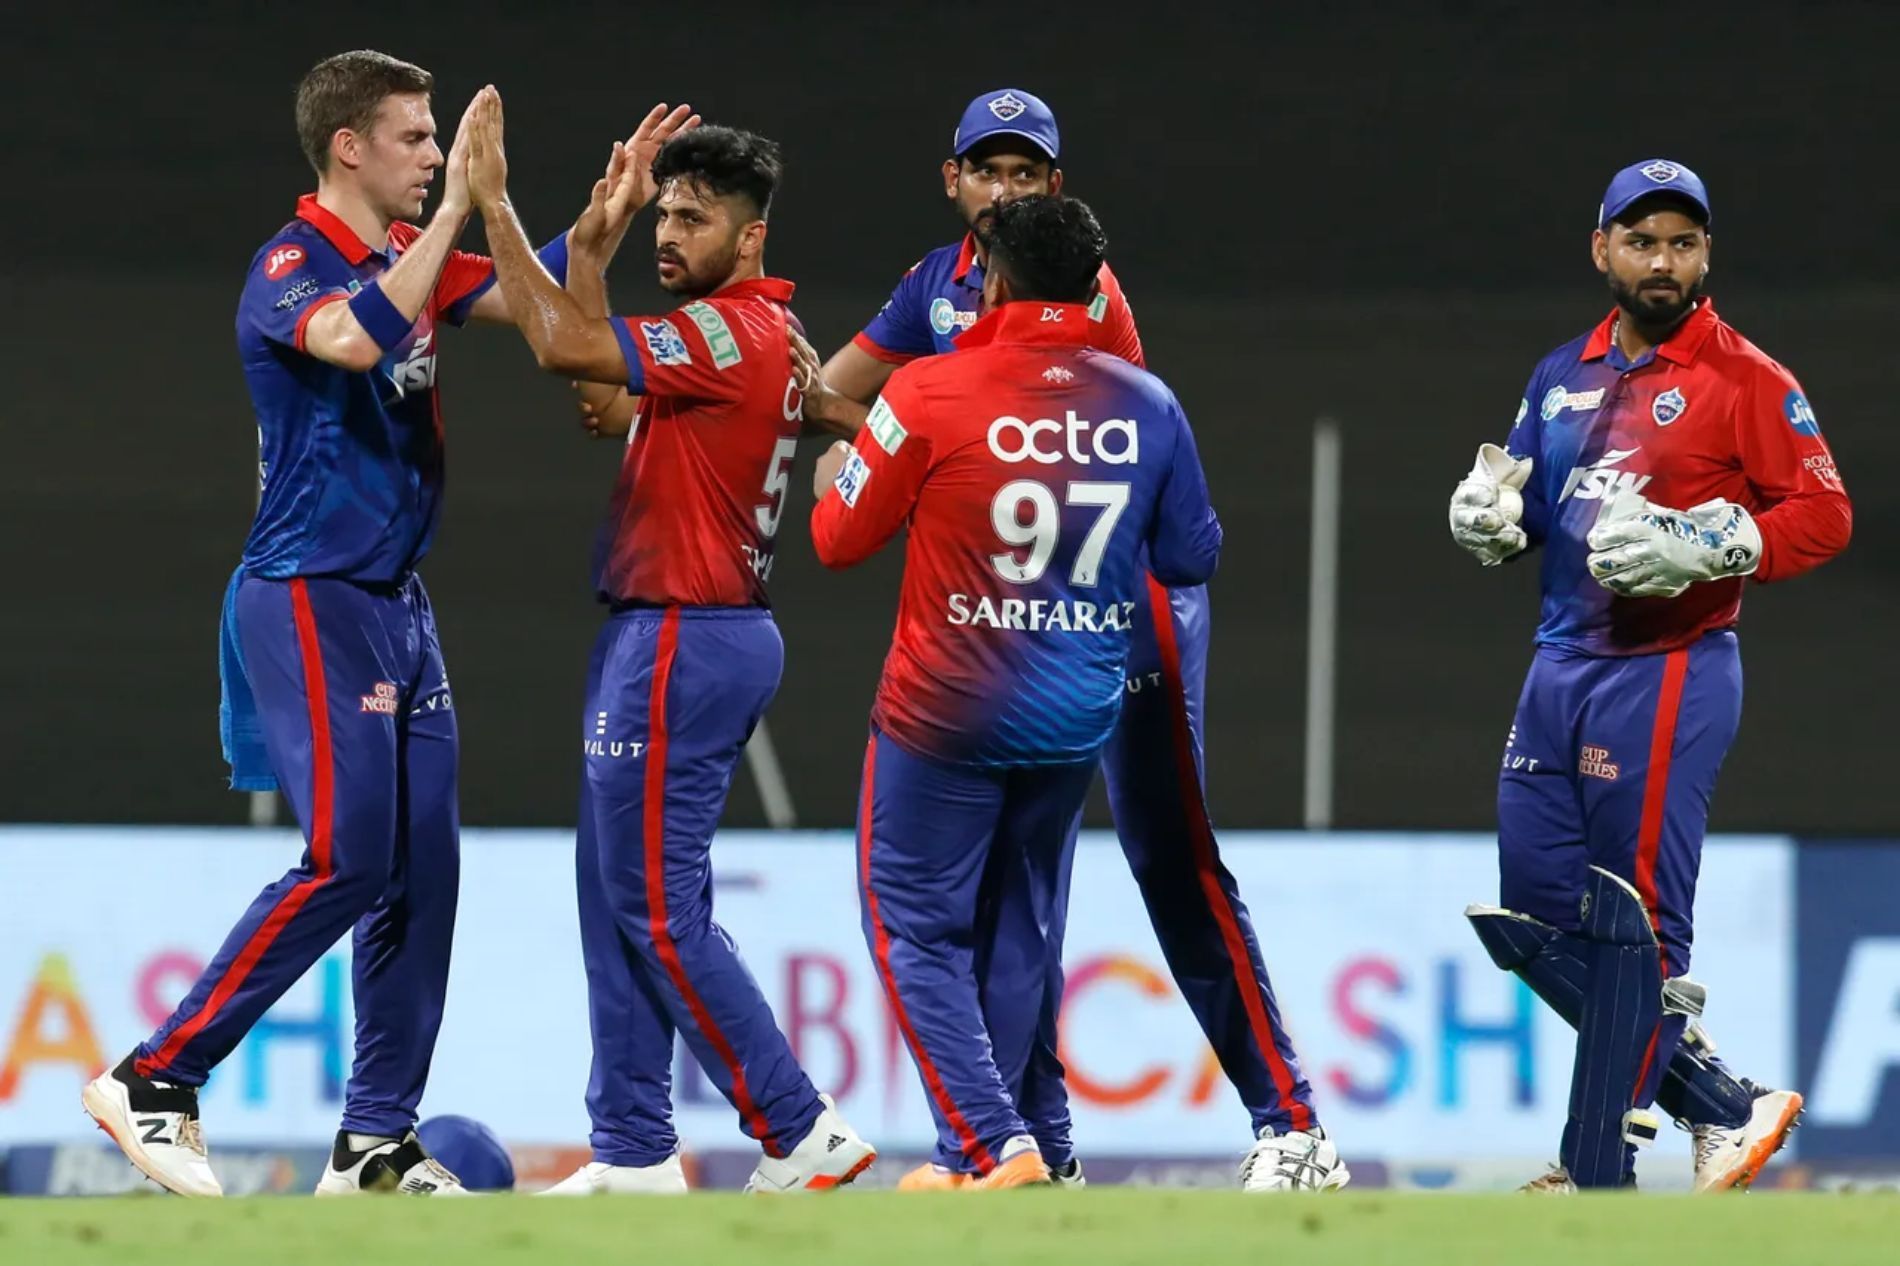 DC pacer Shardul Thakur celebrates a wicket with teammates. Pic: IPLT20.COM